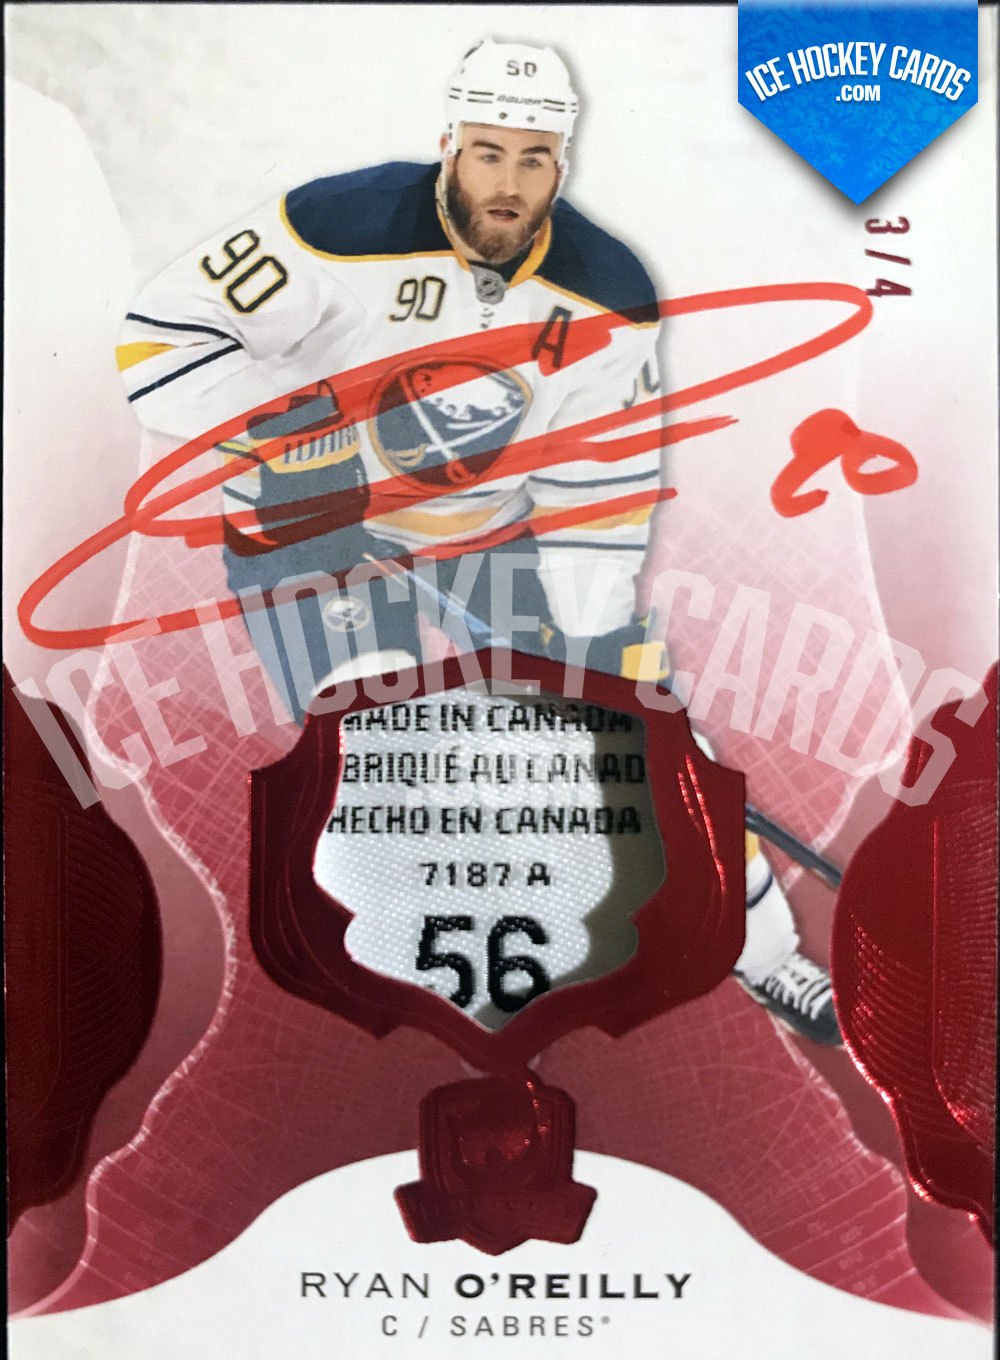 Upper Deck - The Cup 16-17 - Ryan O'Reilly Auto Patch 3 of 4 SUPER RARE